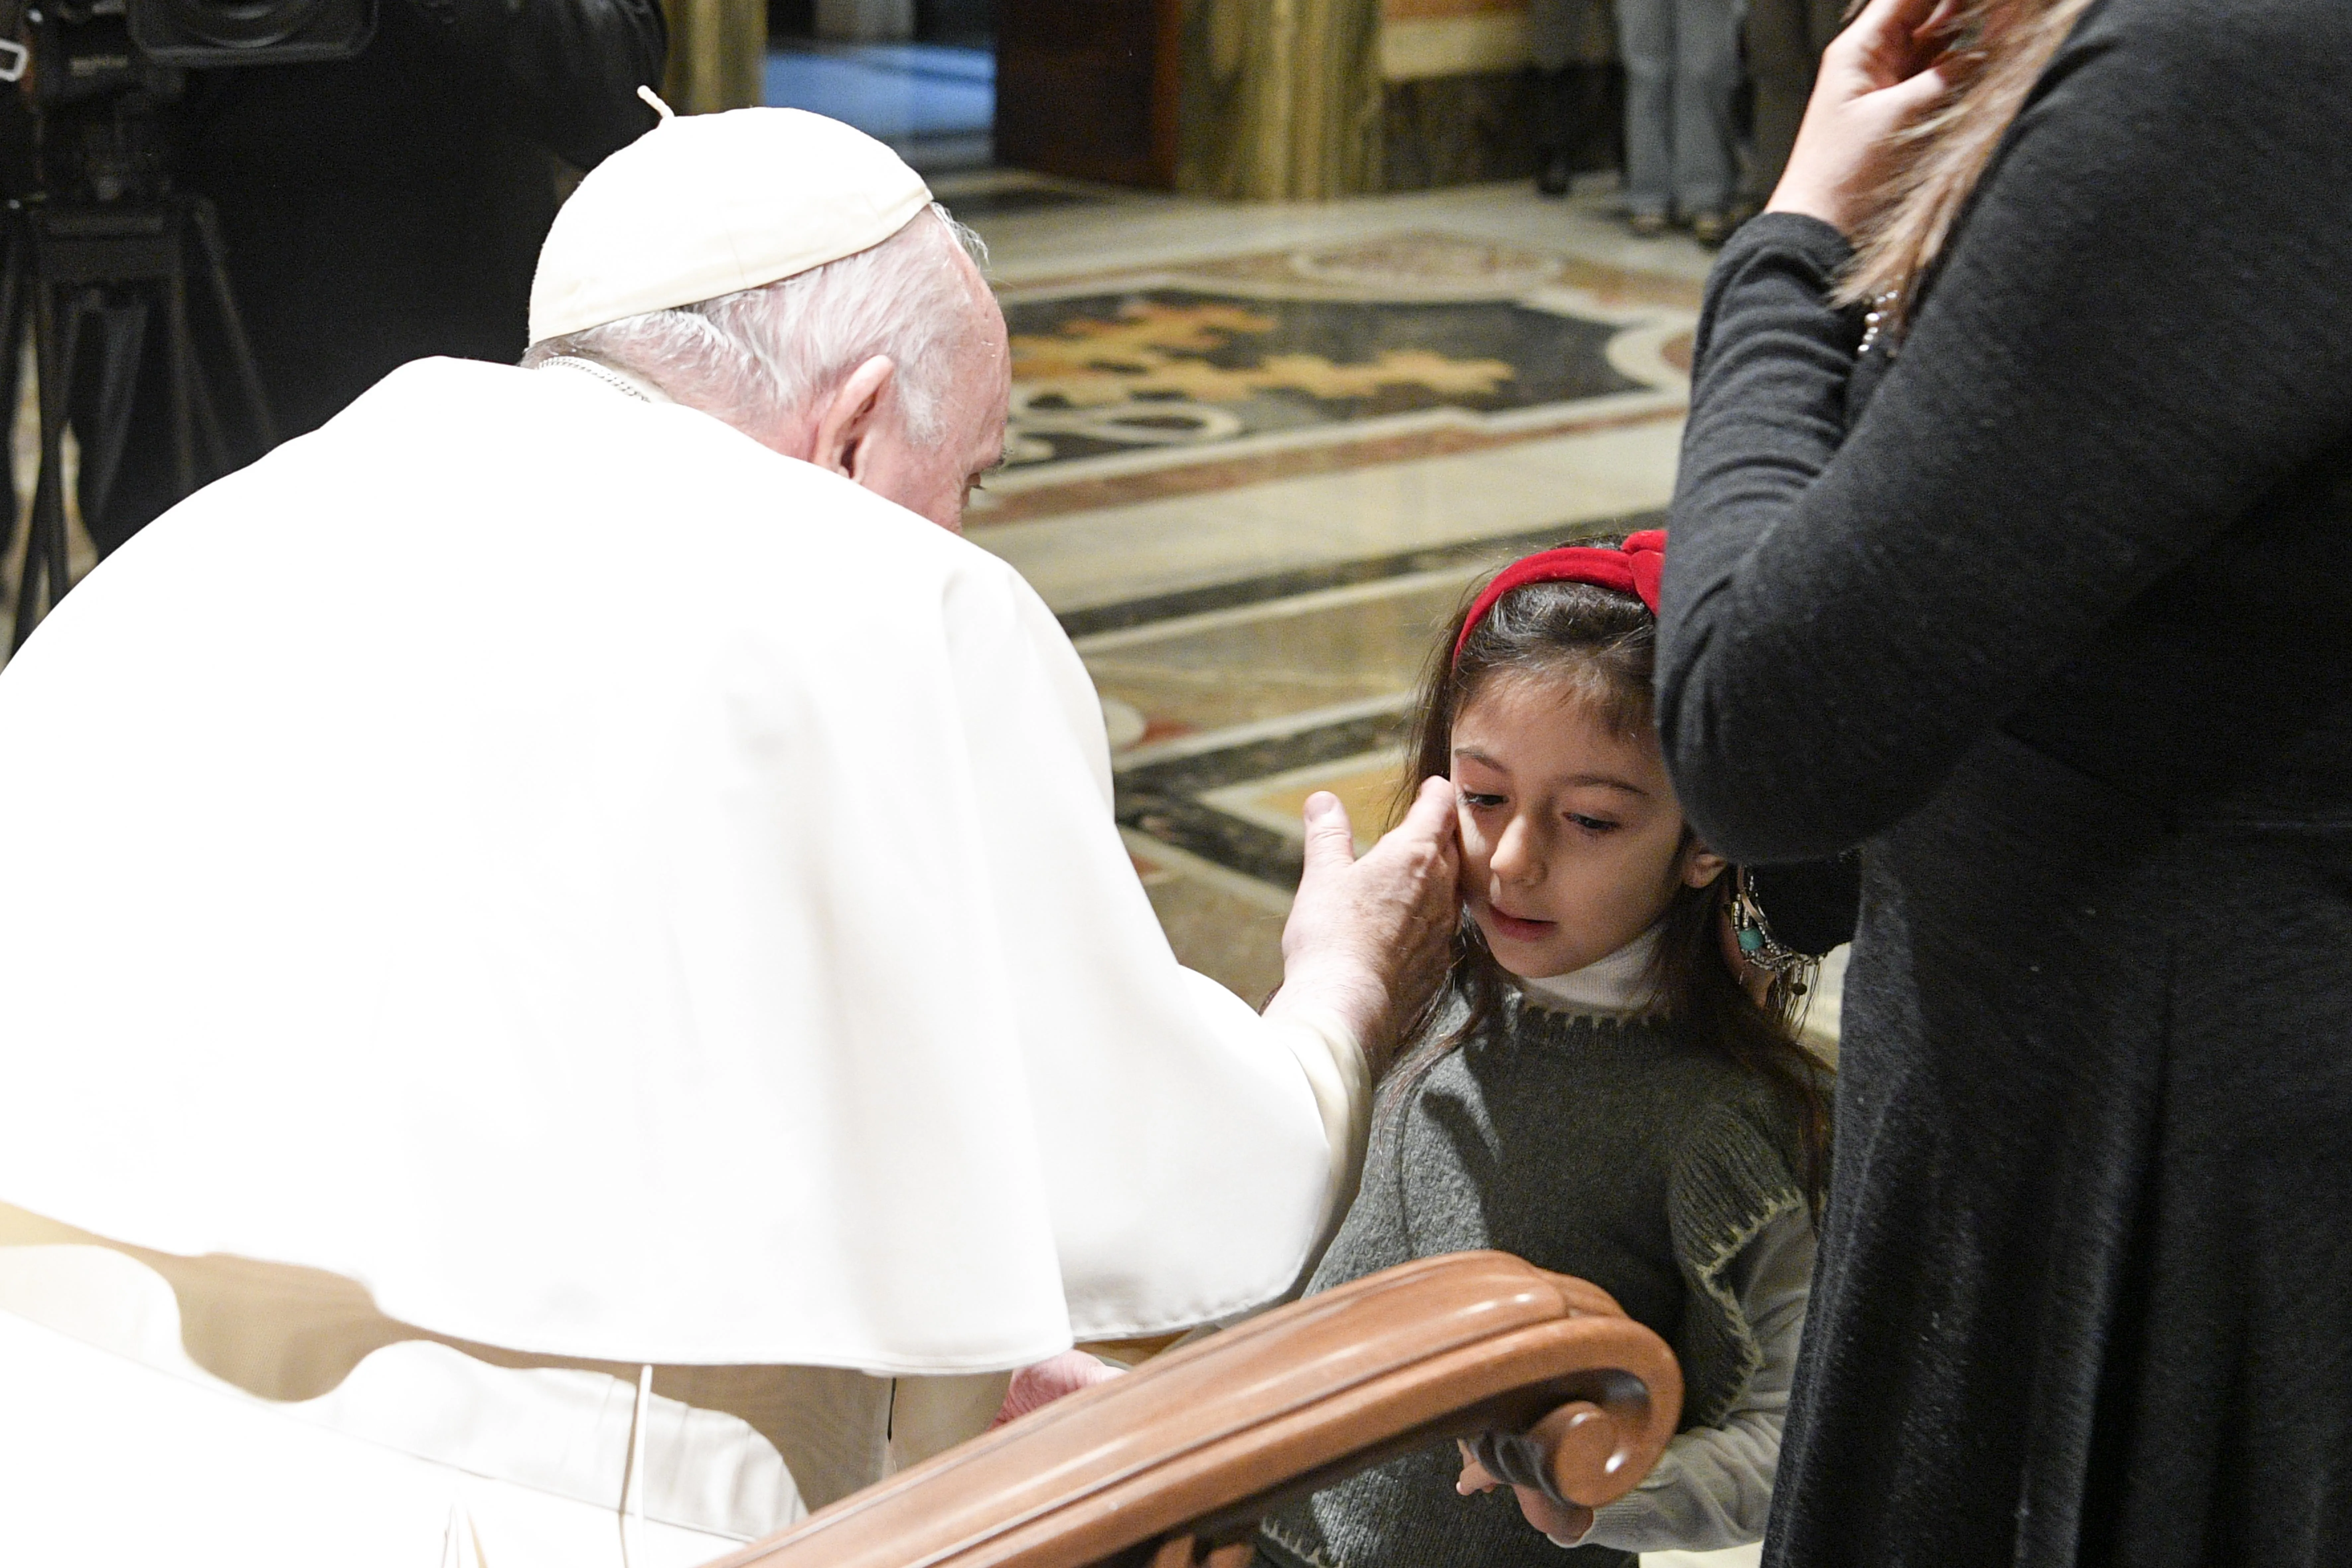 Pope Francis meeting with the Italian Union of the Blind and Visually Impaired at the Vatican, Dec. 12, 2022?w=200&h=150